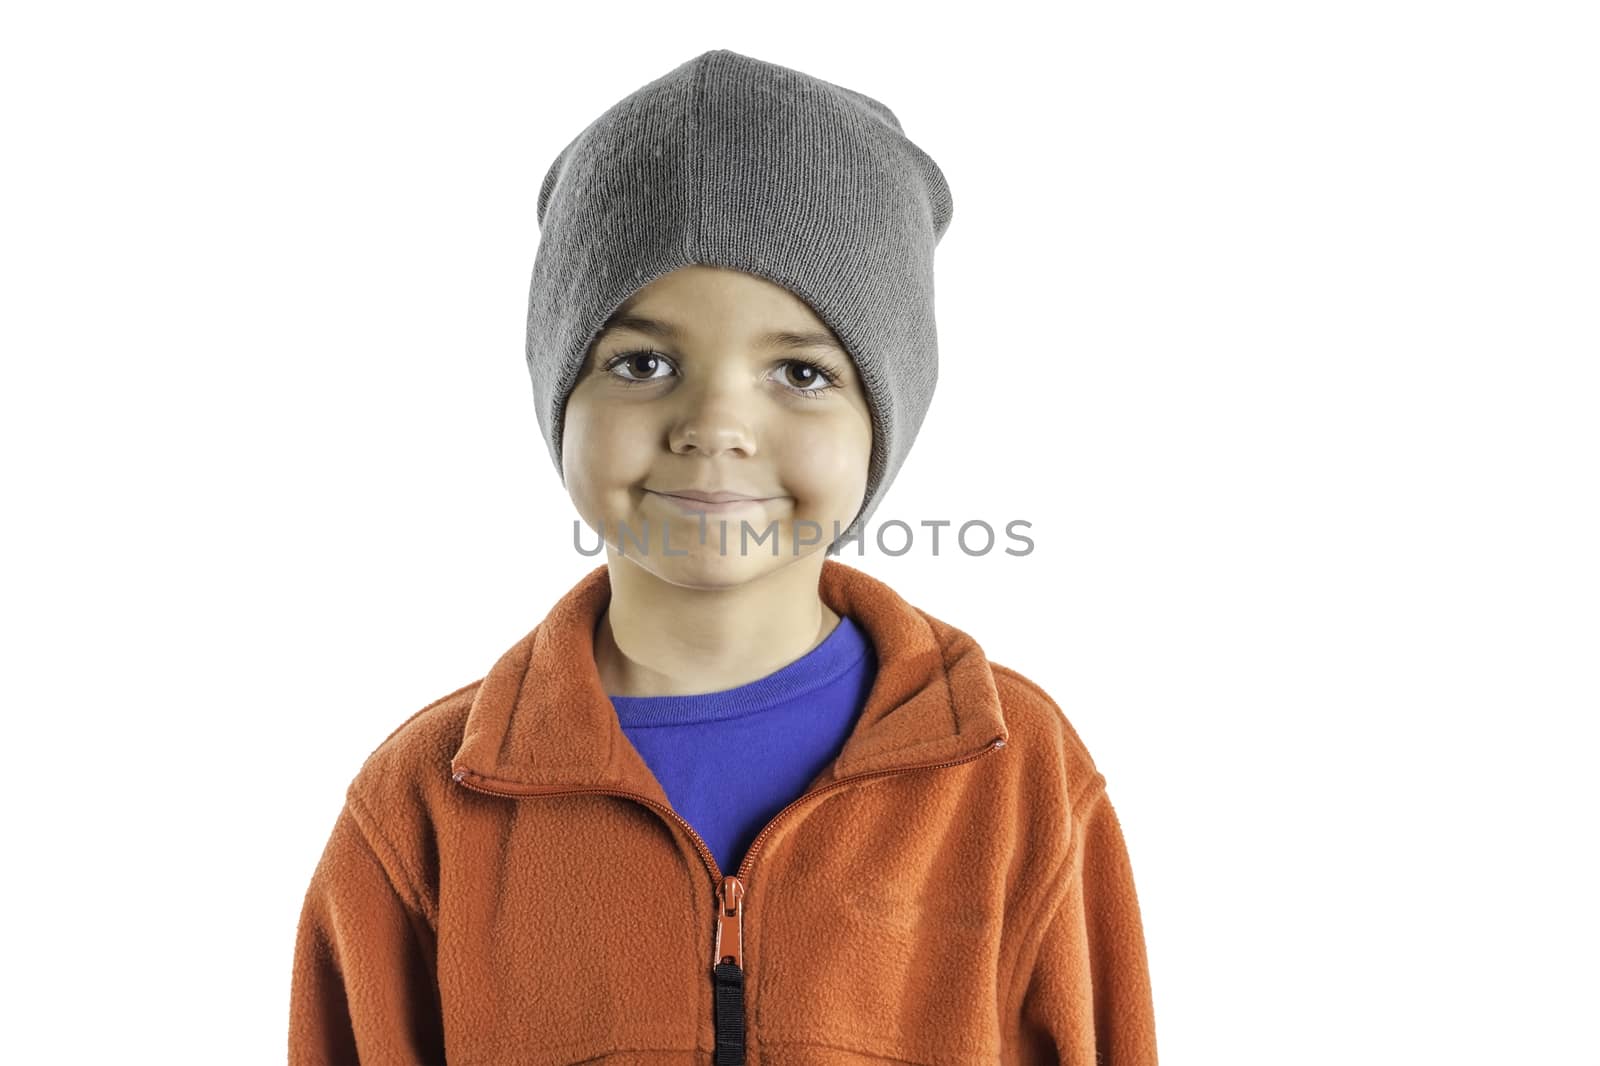 A young boy dressed in winter clothing isolated on a white background.